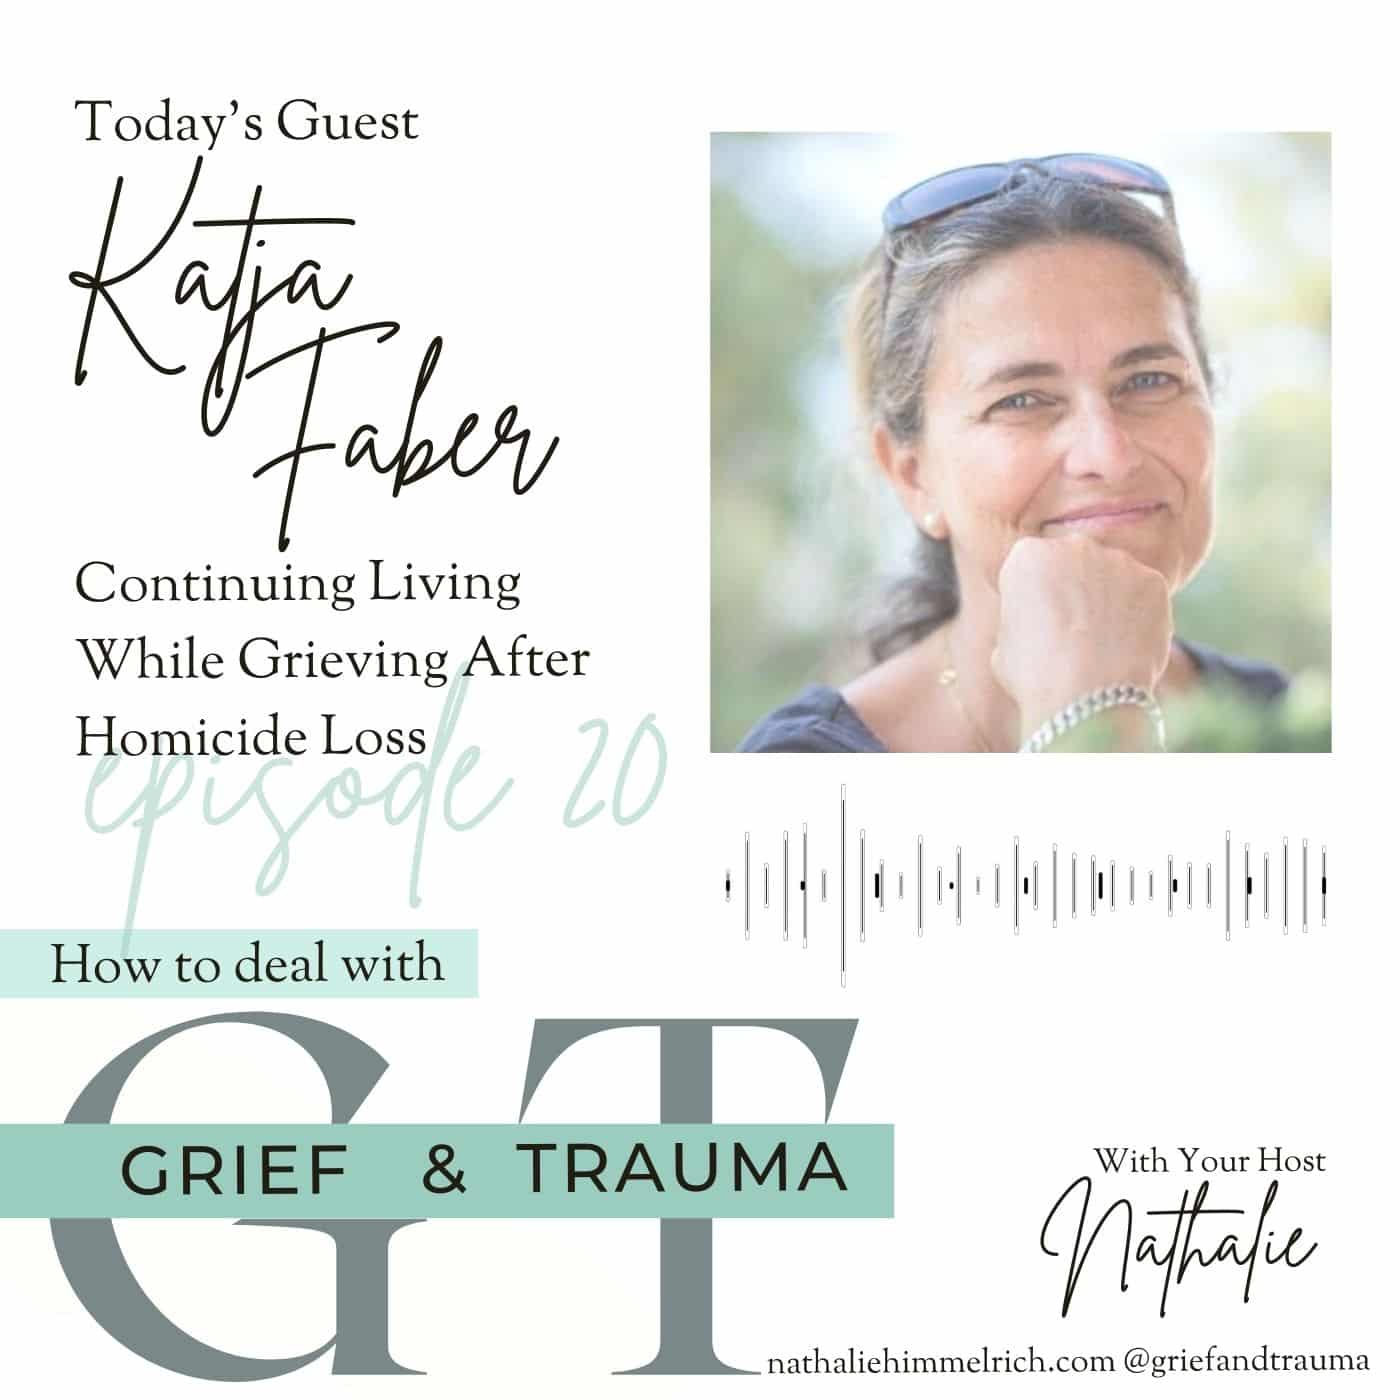 Nathalie with Katja Faber on Continuing Living While Grieving After Homicide Loss Part 2 | Episode 20